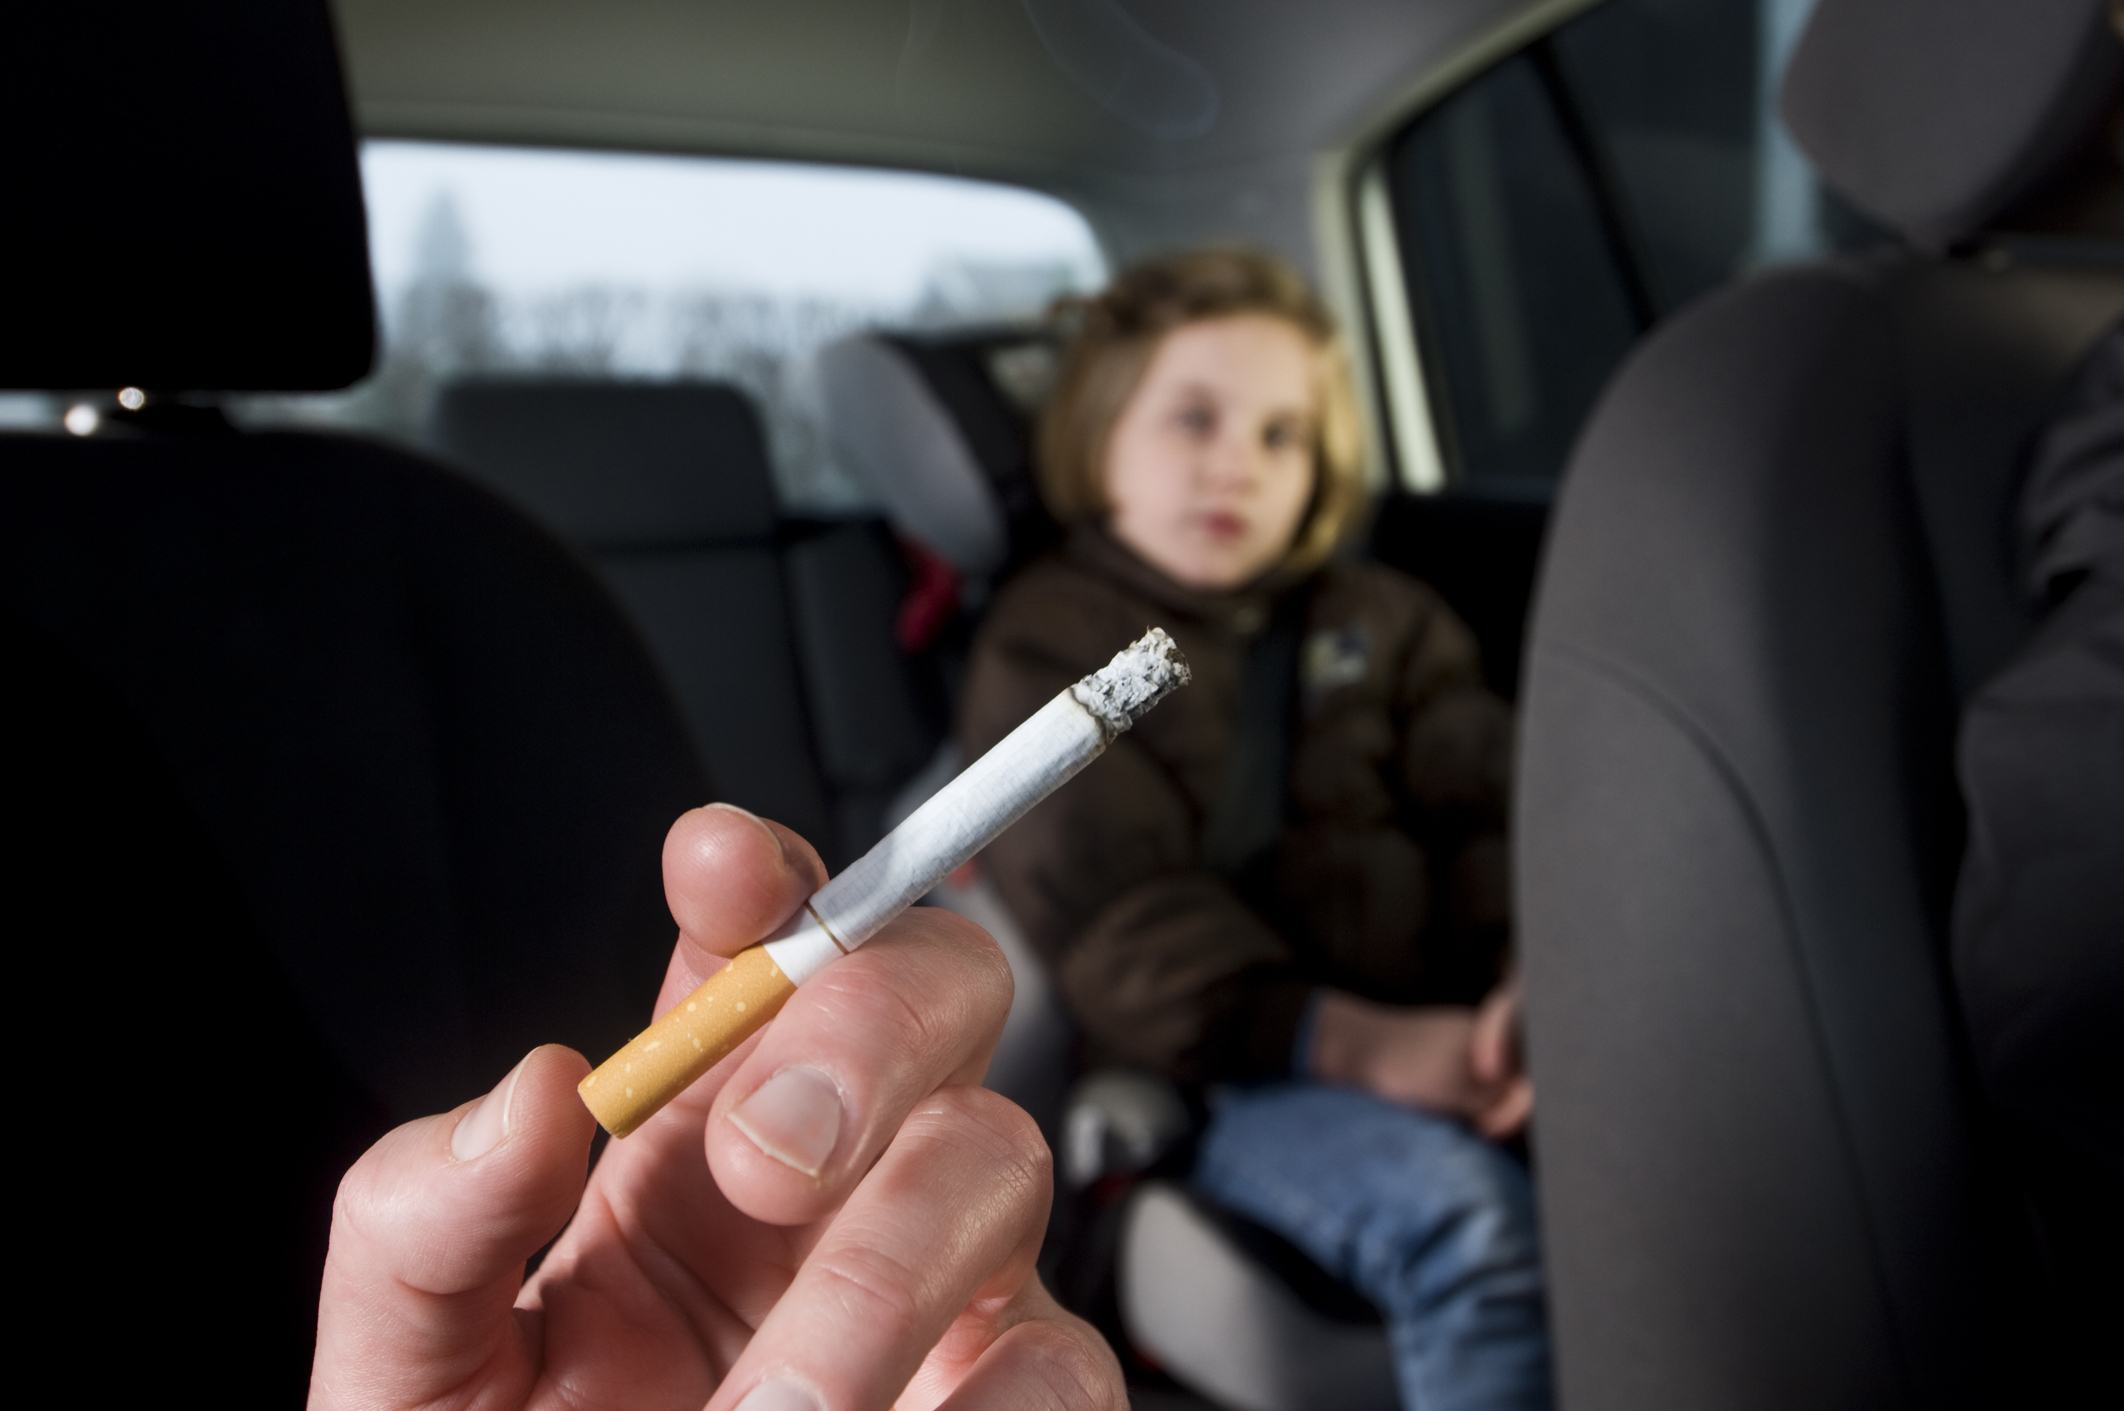 A parent is smoking a cigarette in a car with their kid in it